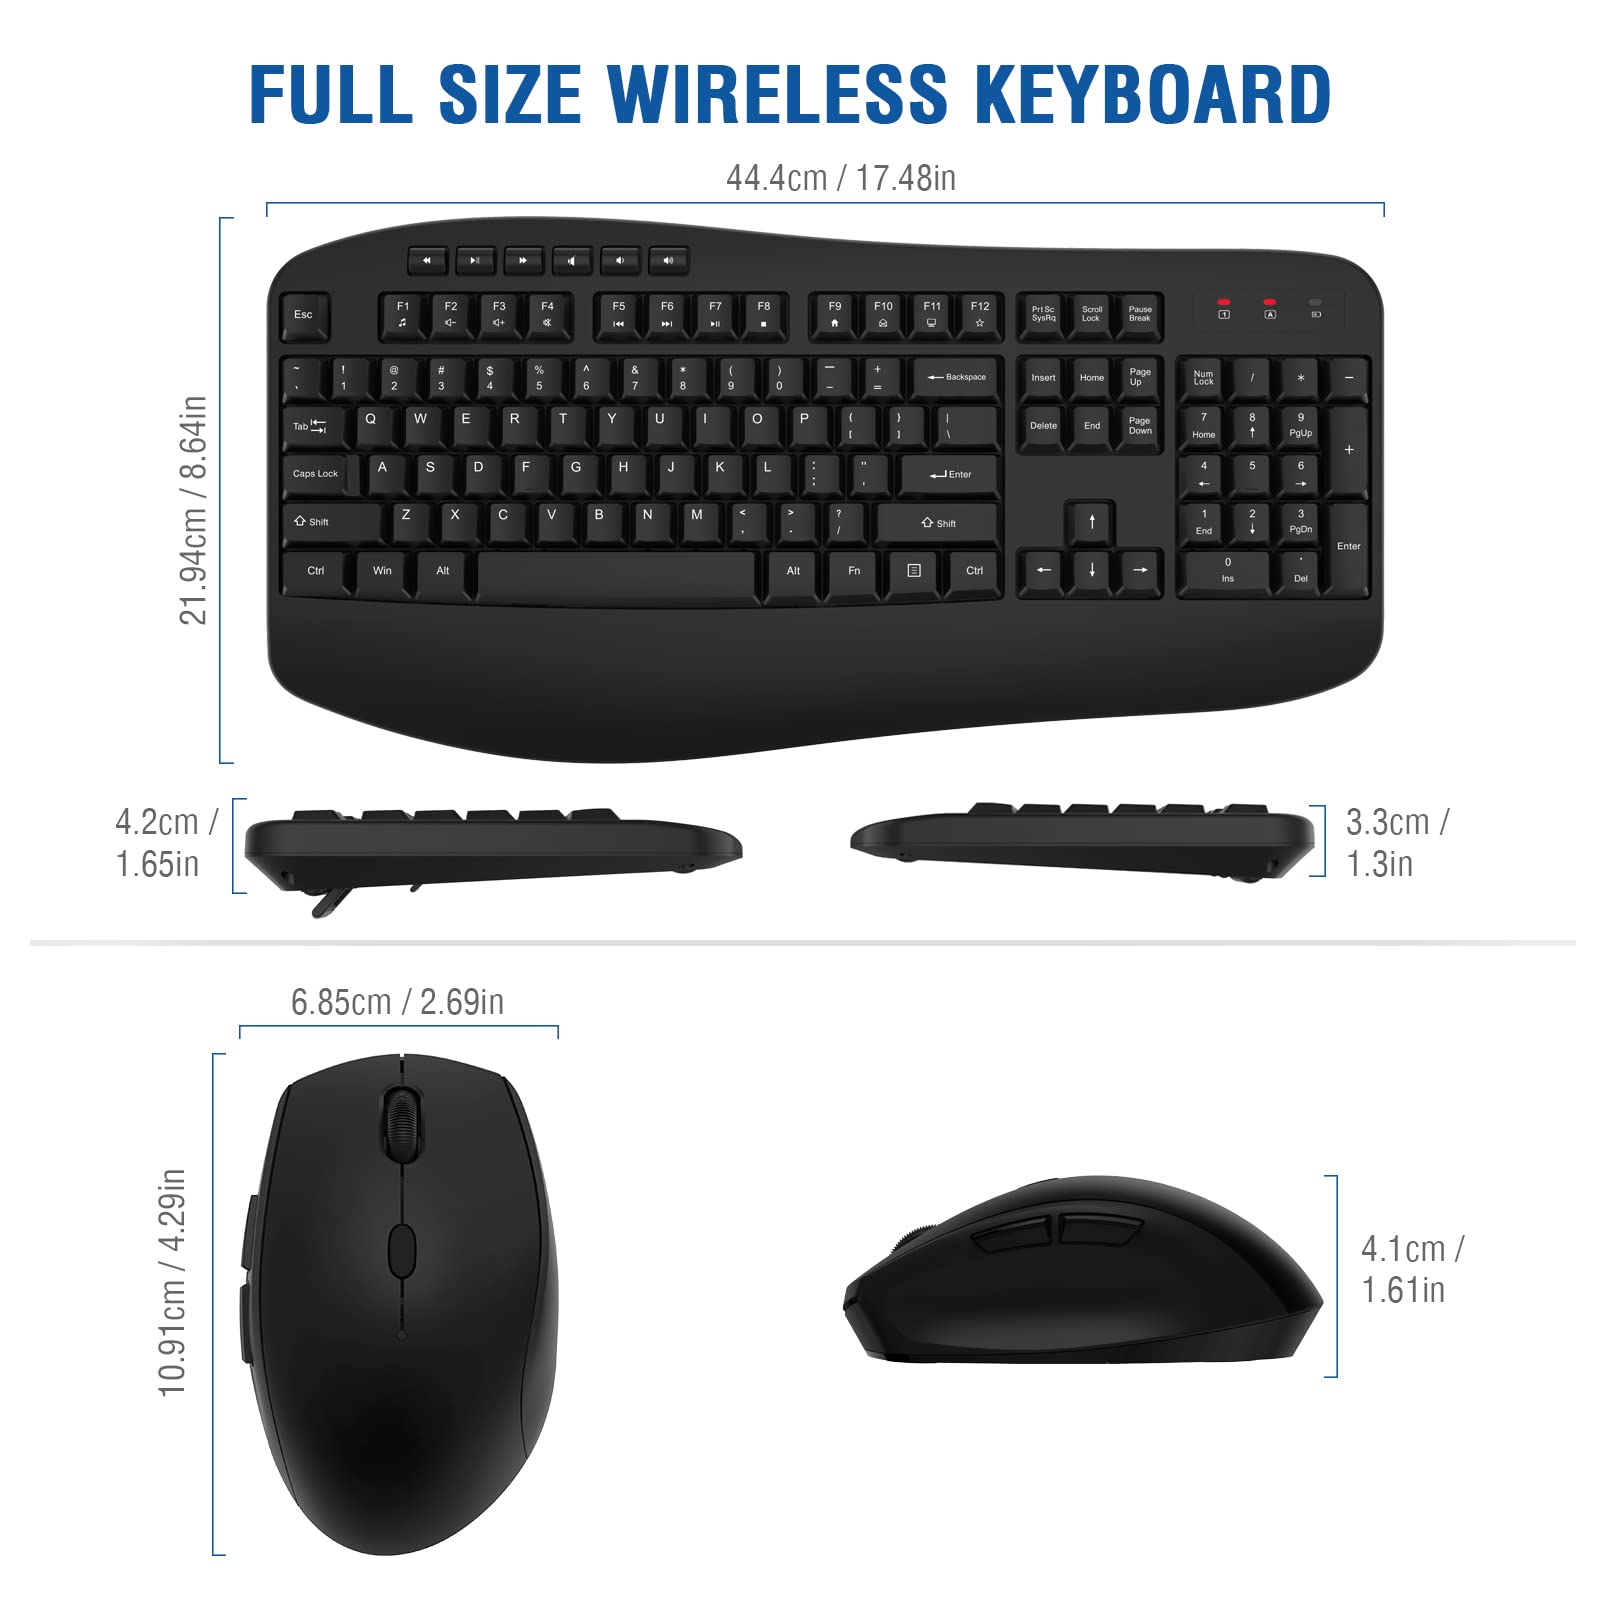 EDJO 2.4G Full-Sized Large Wireless Keyboard with Comfortable Palm Rest and Optical Wireless Mouse for Windows, Mac OS PC/Desktops/Computer/Laptops